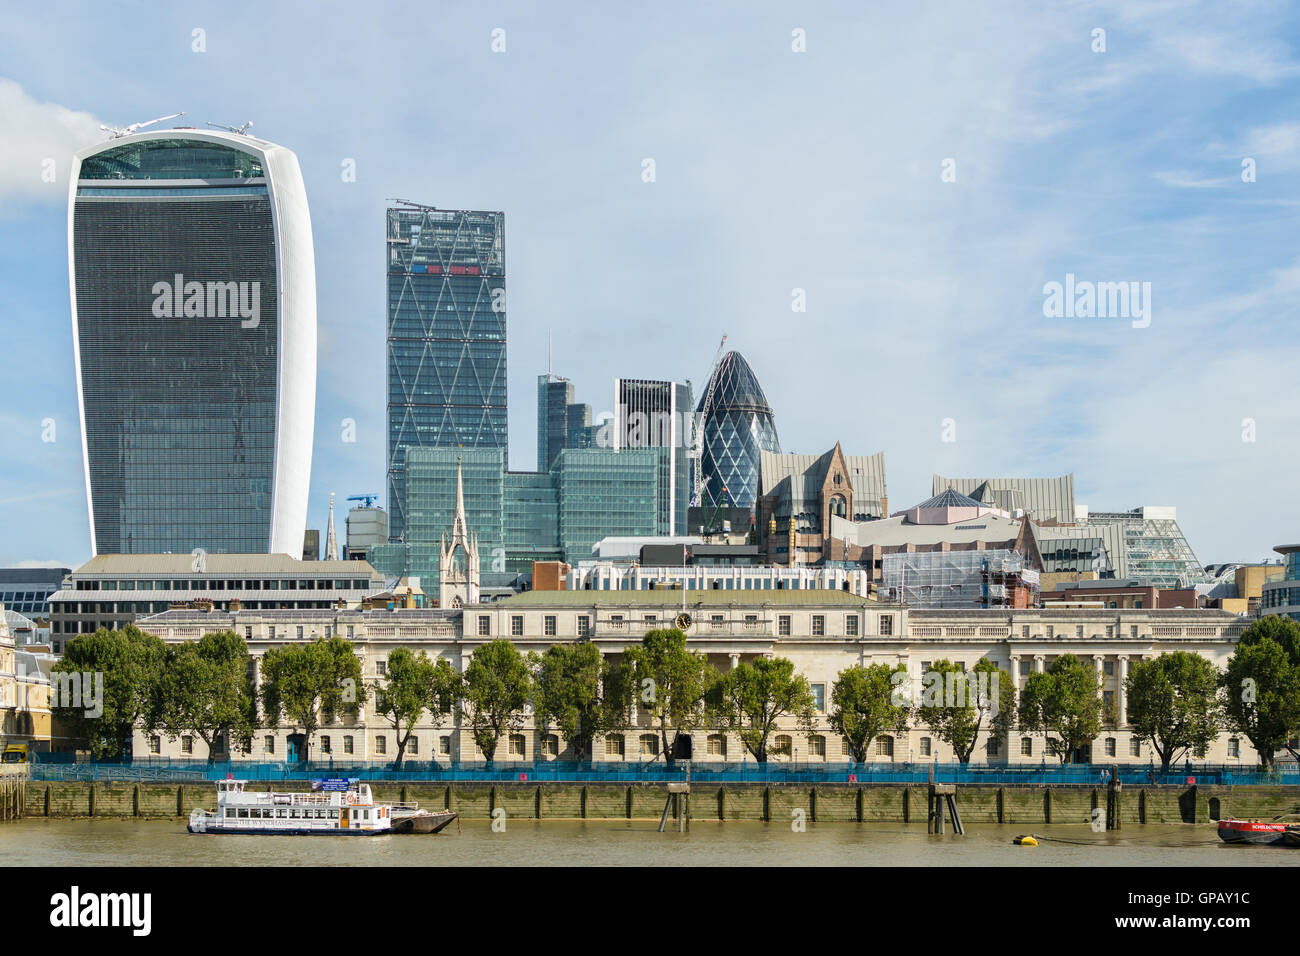 London, UK - 31 August 2016: City of London view from the river Thames. International business and banking district. Walkie Talk Stock Photo